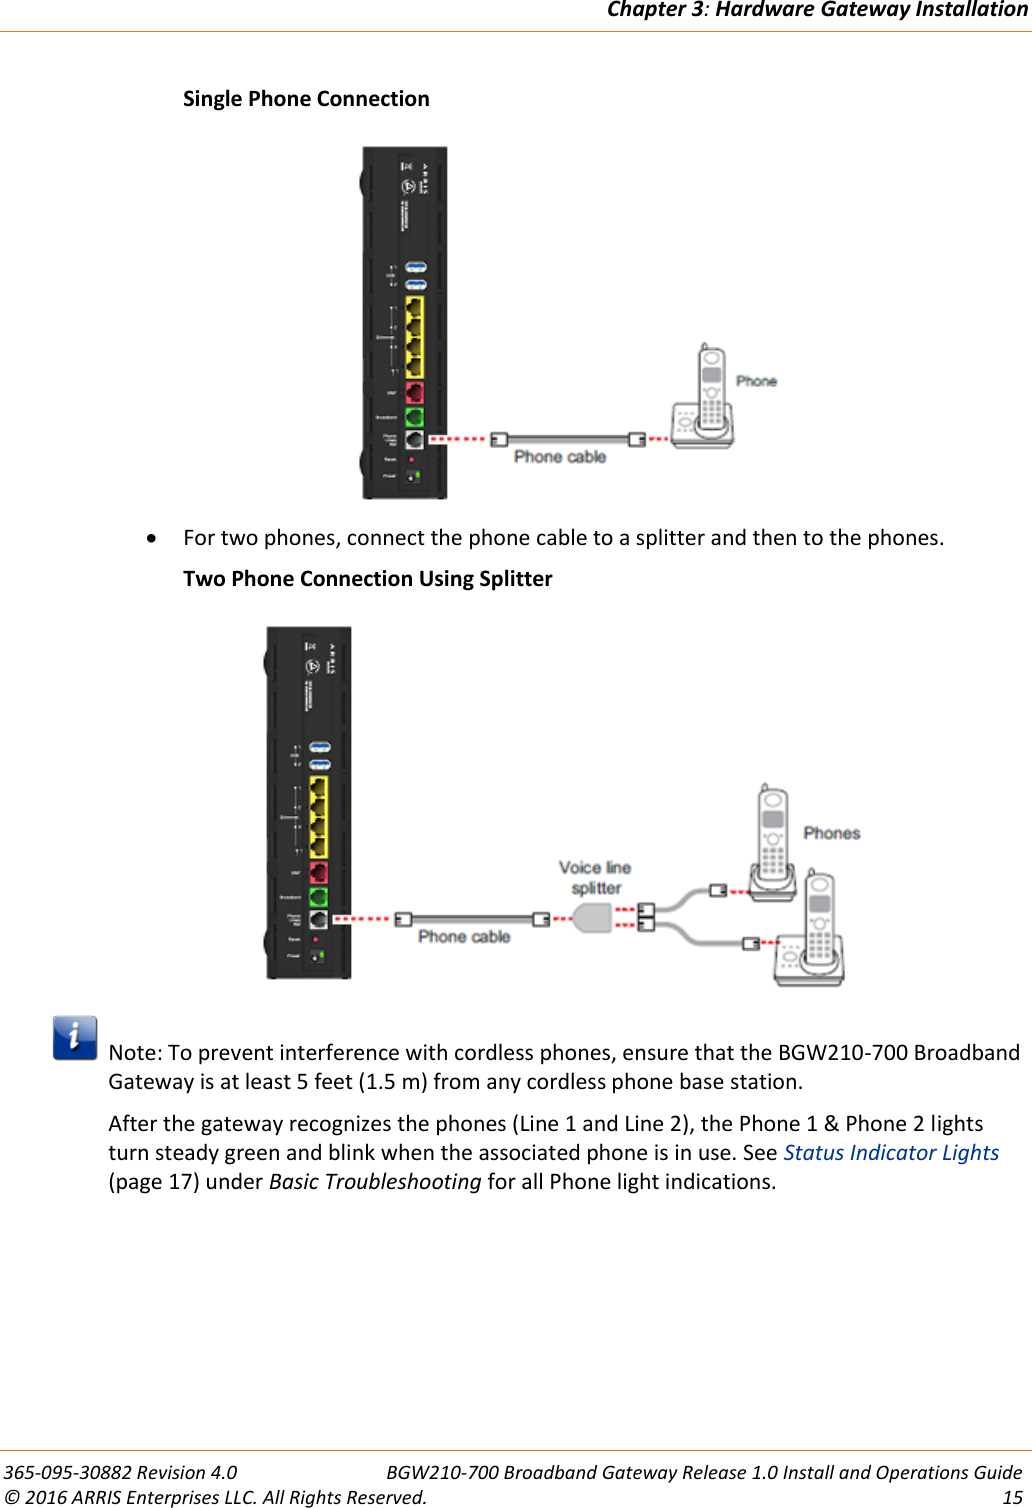 Chapter 3: Hardware Gateway Installation  365-095-30882 Revision 4.0  BGW210-700 Broadband Gateway Release 1.0 Install and Operations Guide © 2016 ARRIS Enterprises LLC. All Rights Reserved.  15    Single Phone Connection   For two phones, connect the phone cable to a splitter and then to the phones.   Two Phone Connection Using Splitter    Note: To prevent interference with cordless phones, ensure that the BGW210-700 Broadband Gateway is at least 5 feet (1.5 m) from any cordless phone base station. After the gateway recognizes the phones (Line 1 and Line 2), the Phone 1 &amp; Phone 2 lights turn steady green and blink when the associated phone is in use. See Status Indicator Lights (page 17) under Basic Troubleshooting for all Phone light indications.   